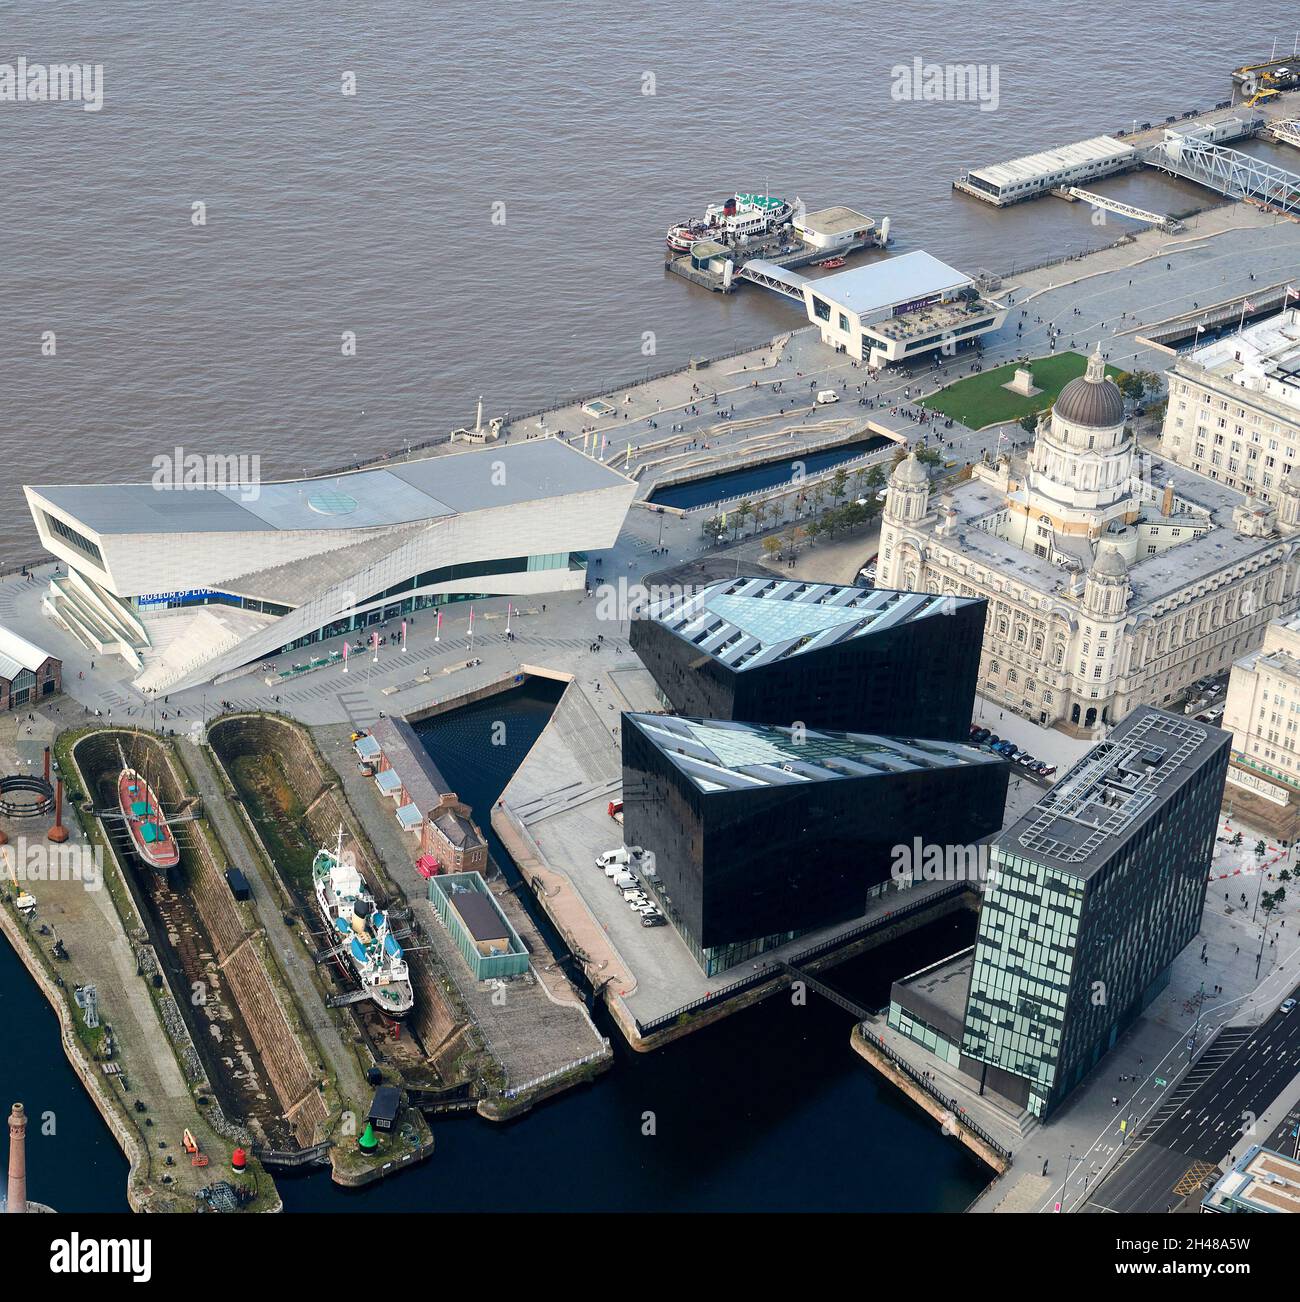 An aerial view of the Museum of Liverpool, Waterfront, Merseyside, North West England, UK Stock Photo